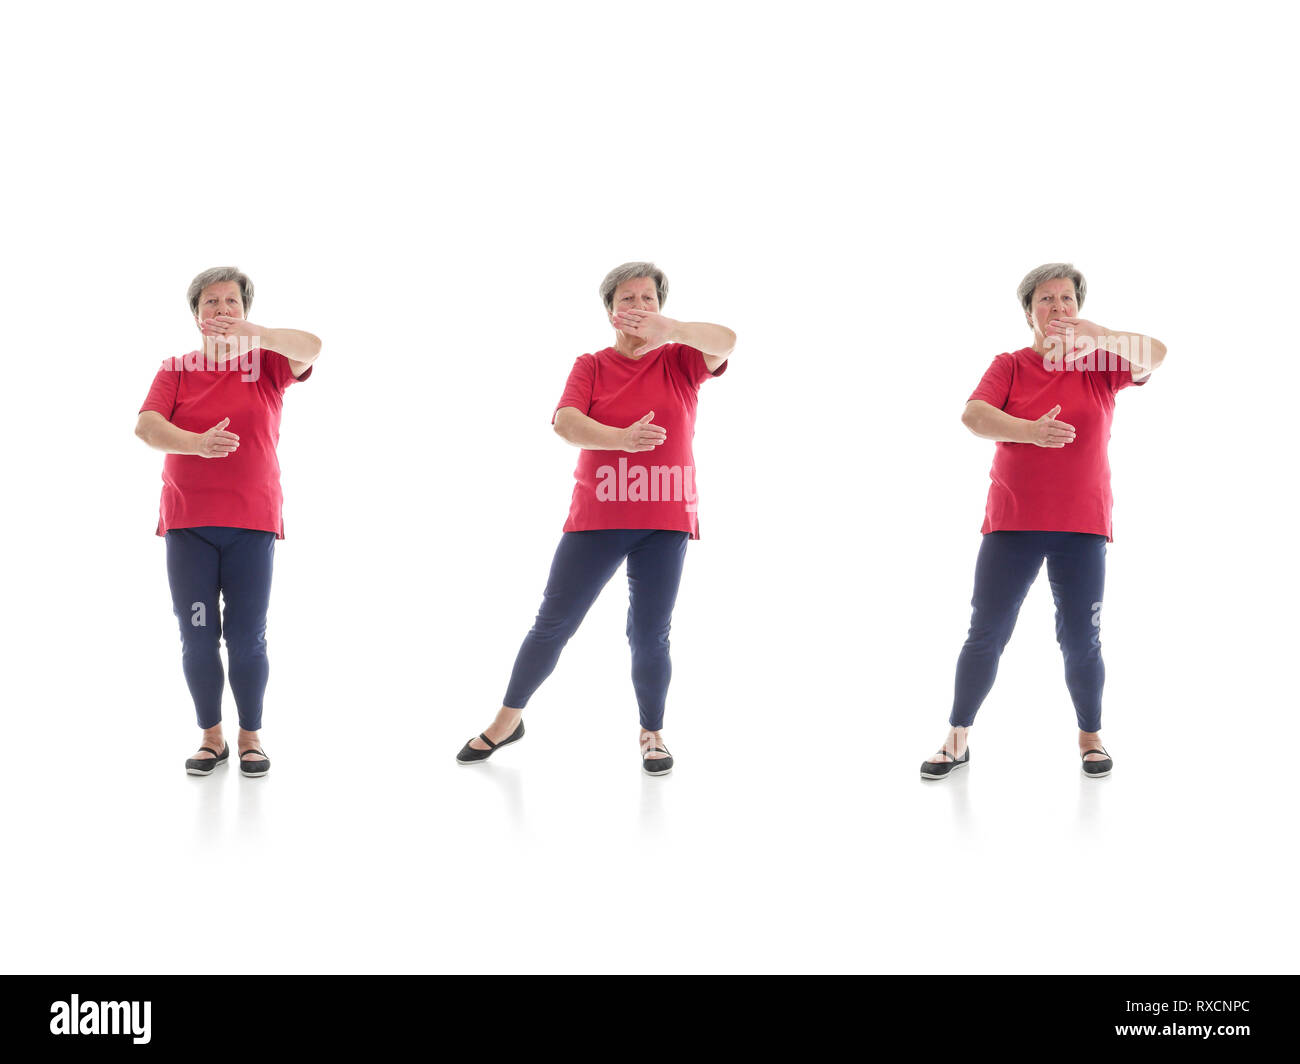 Series of basic Tai chi forms performed by older woman shot on white background Stock Photo